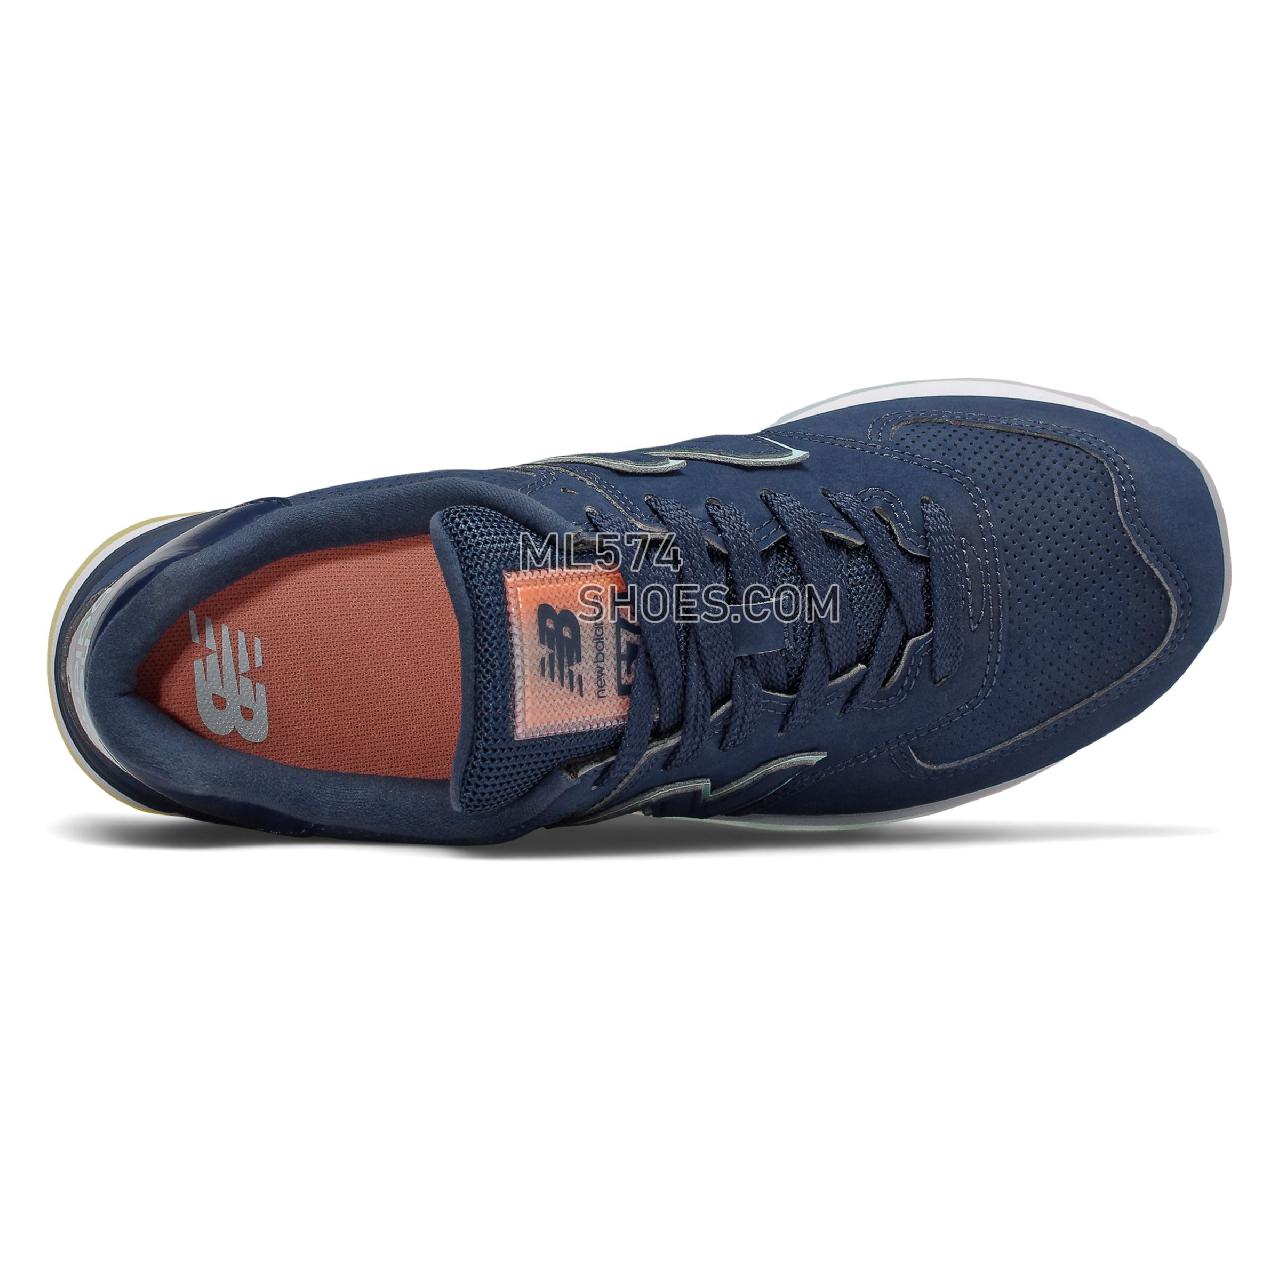 New Balance 574 - Women's Classic Sneakers - Natural Indigo with Bali Blue - WL574SON